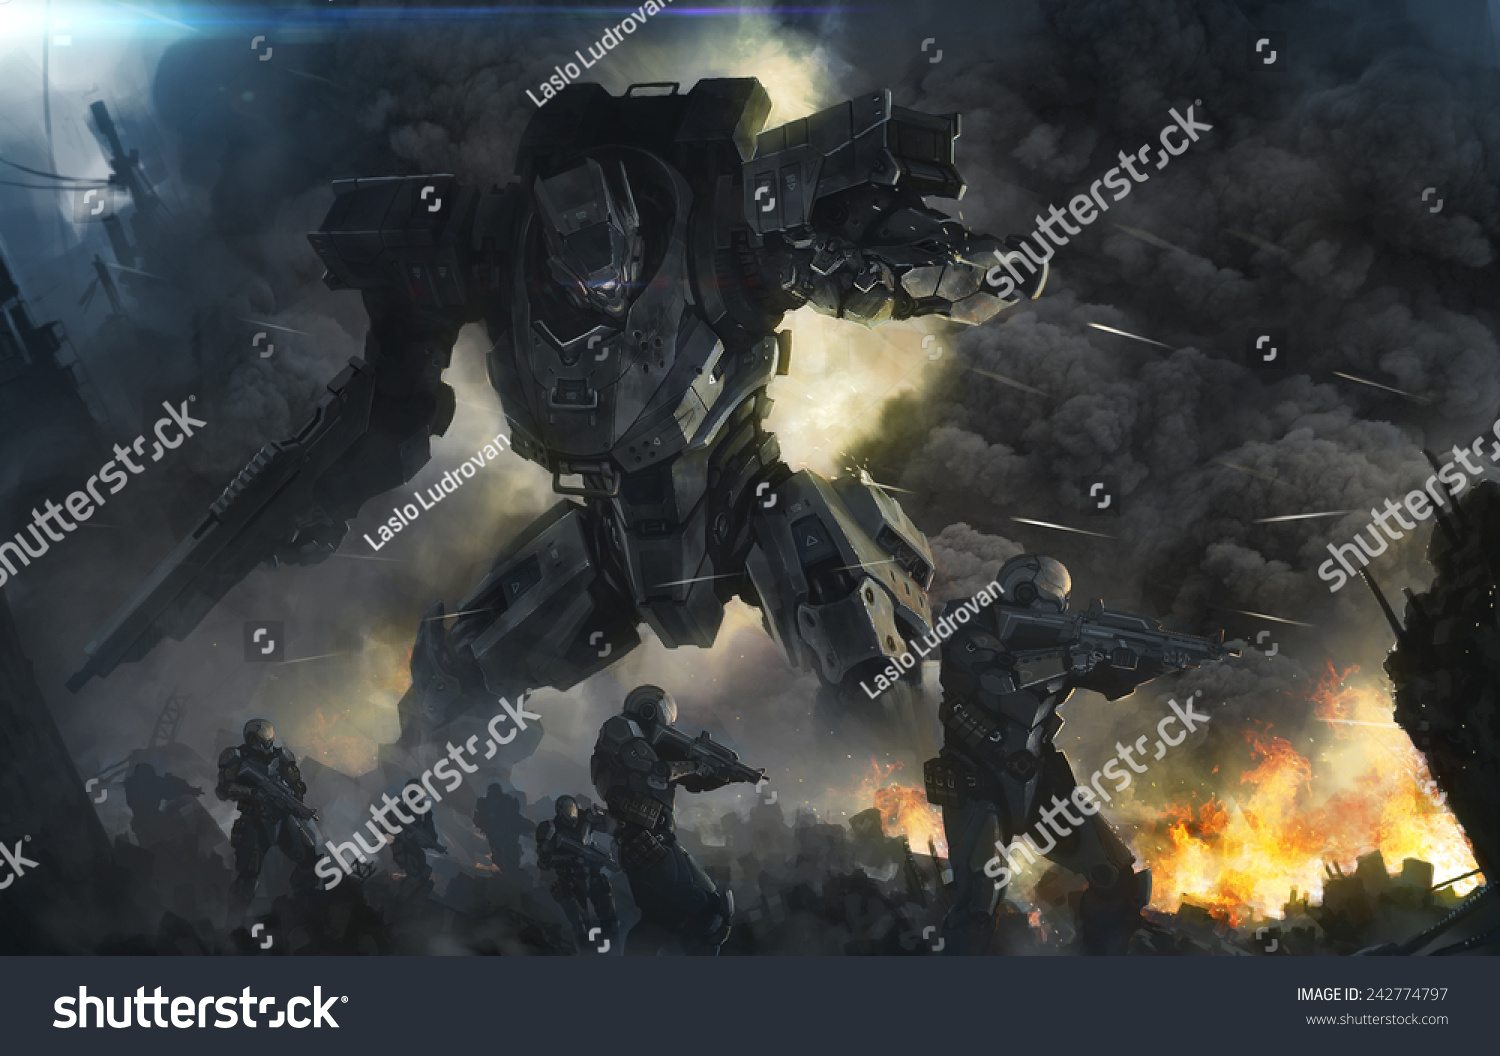 stock-photo-big-robot-and-soldiers-in-a-fight-242774797.jpg